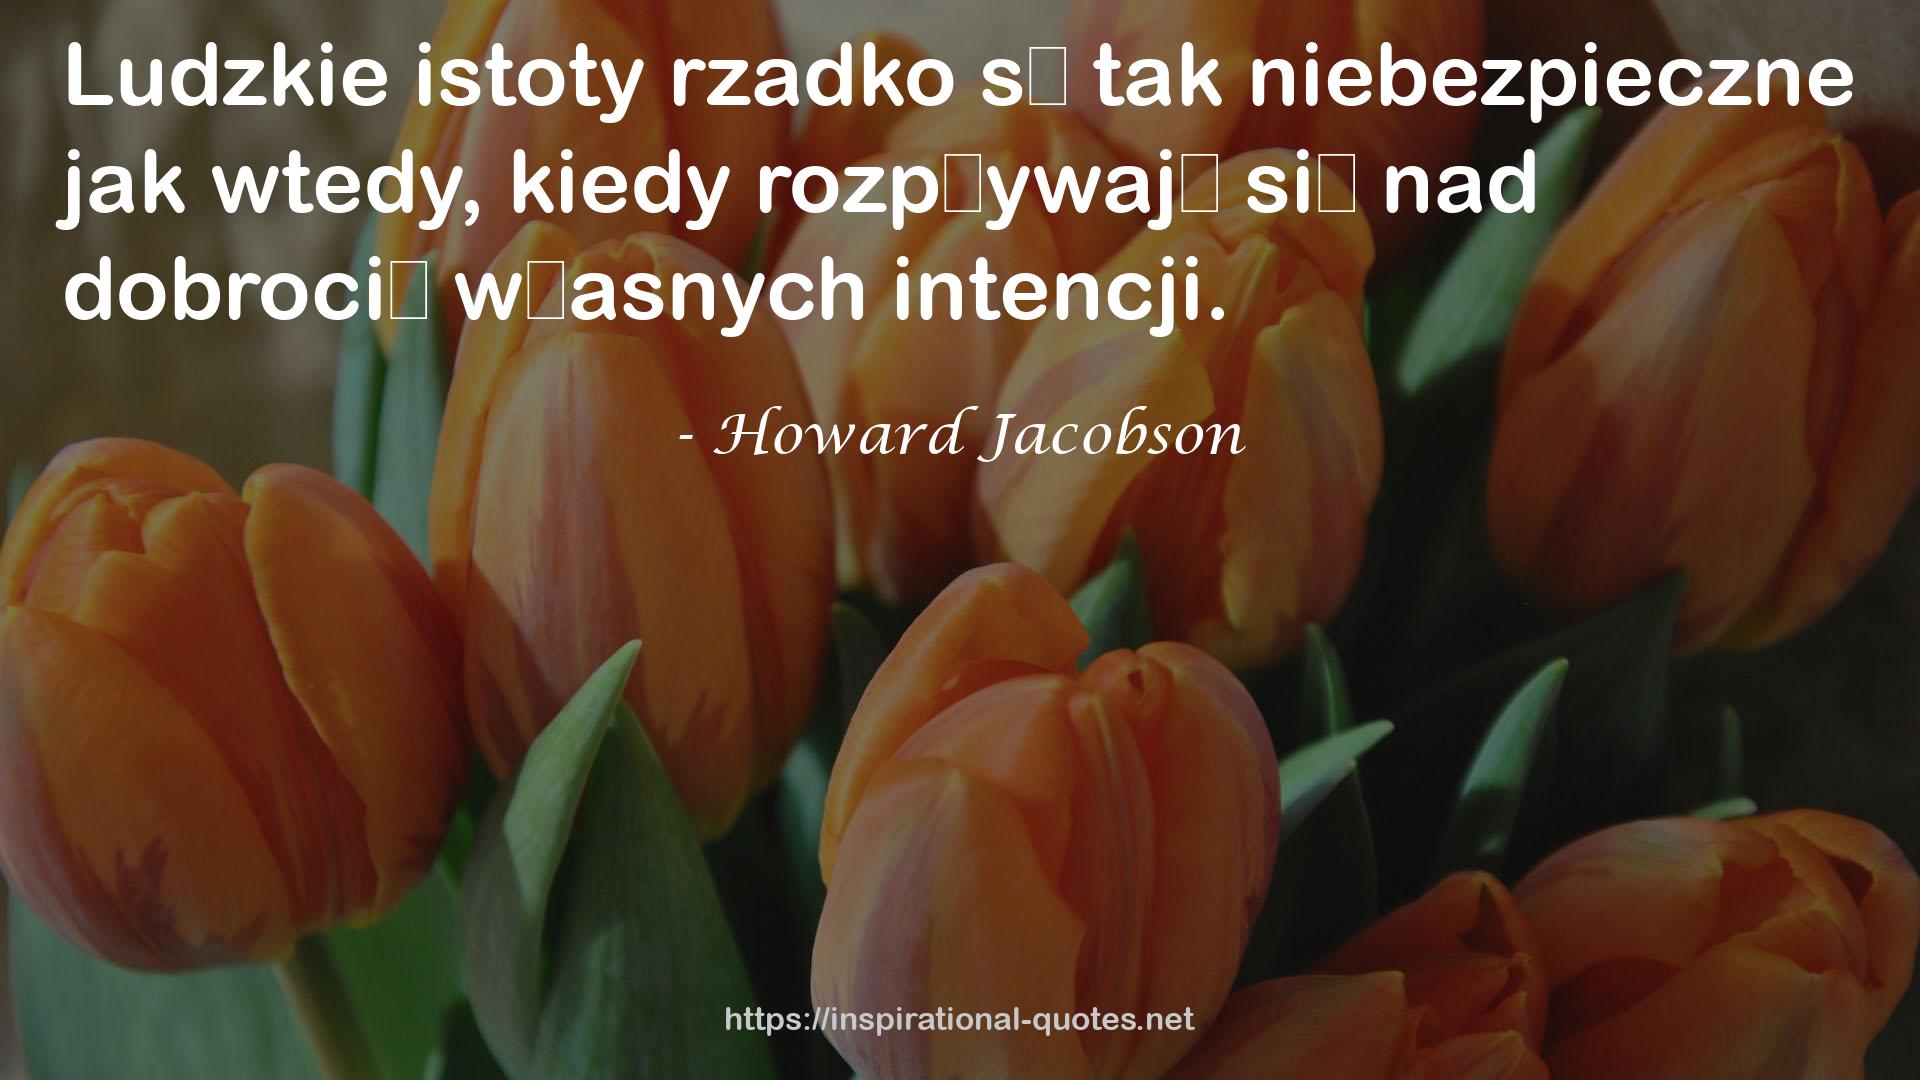 Howard Jacobson QUOTES